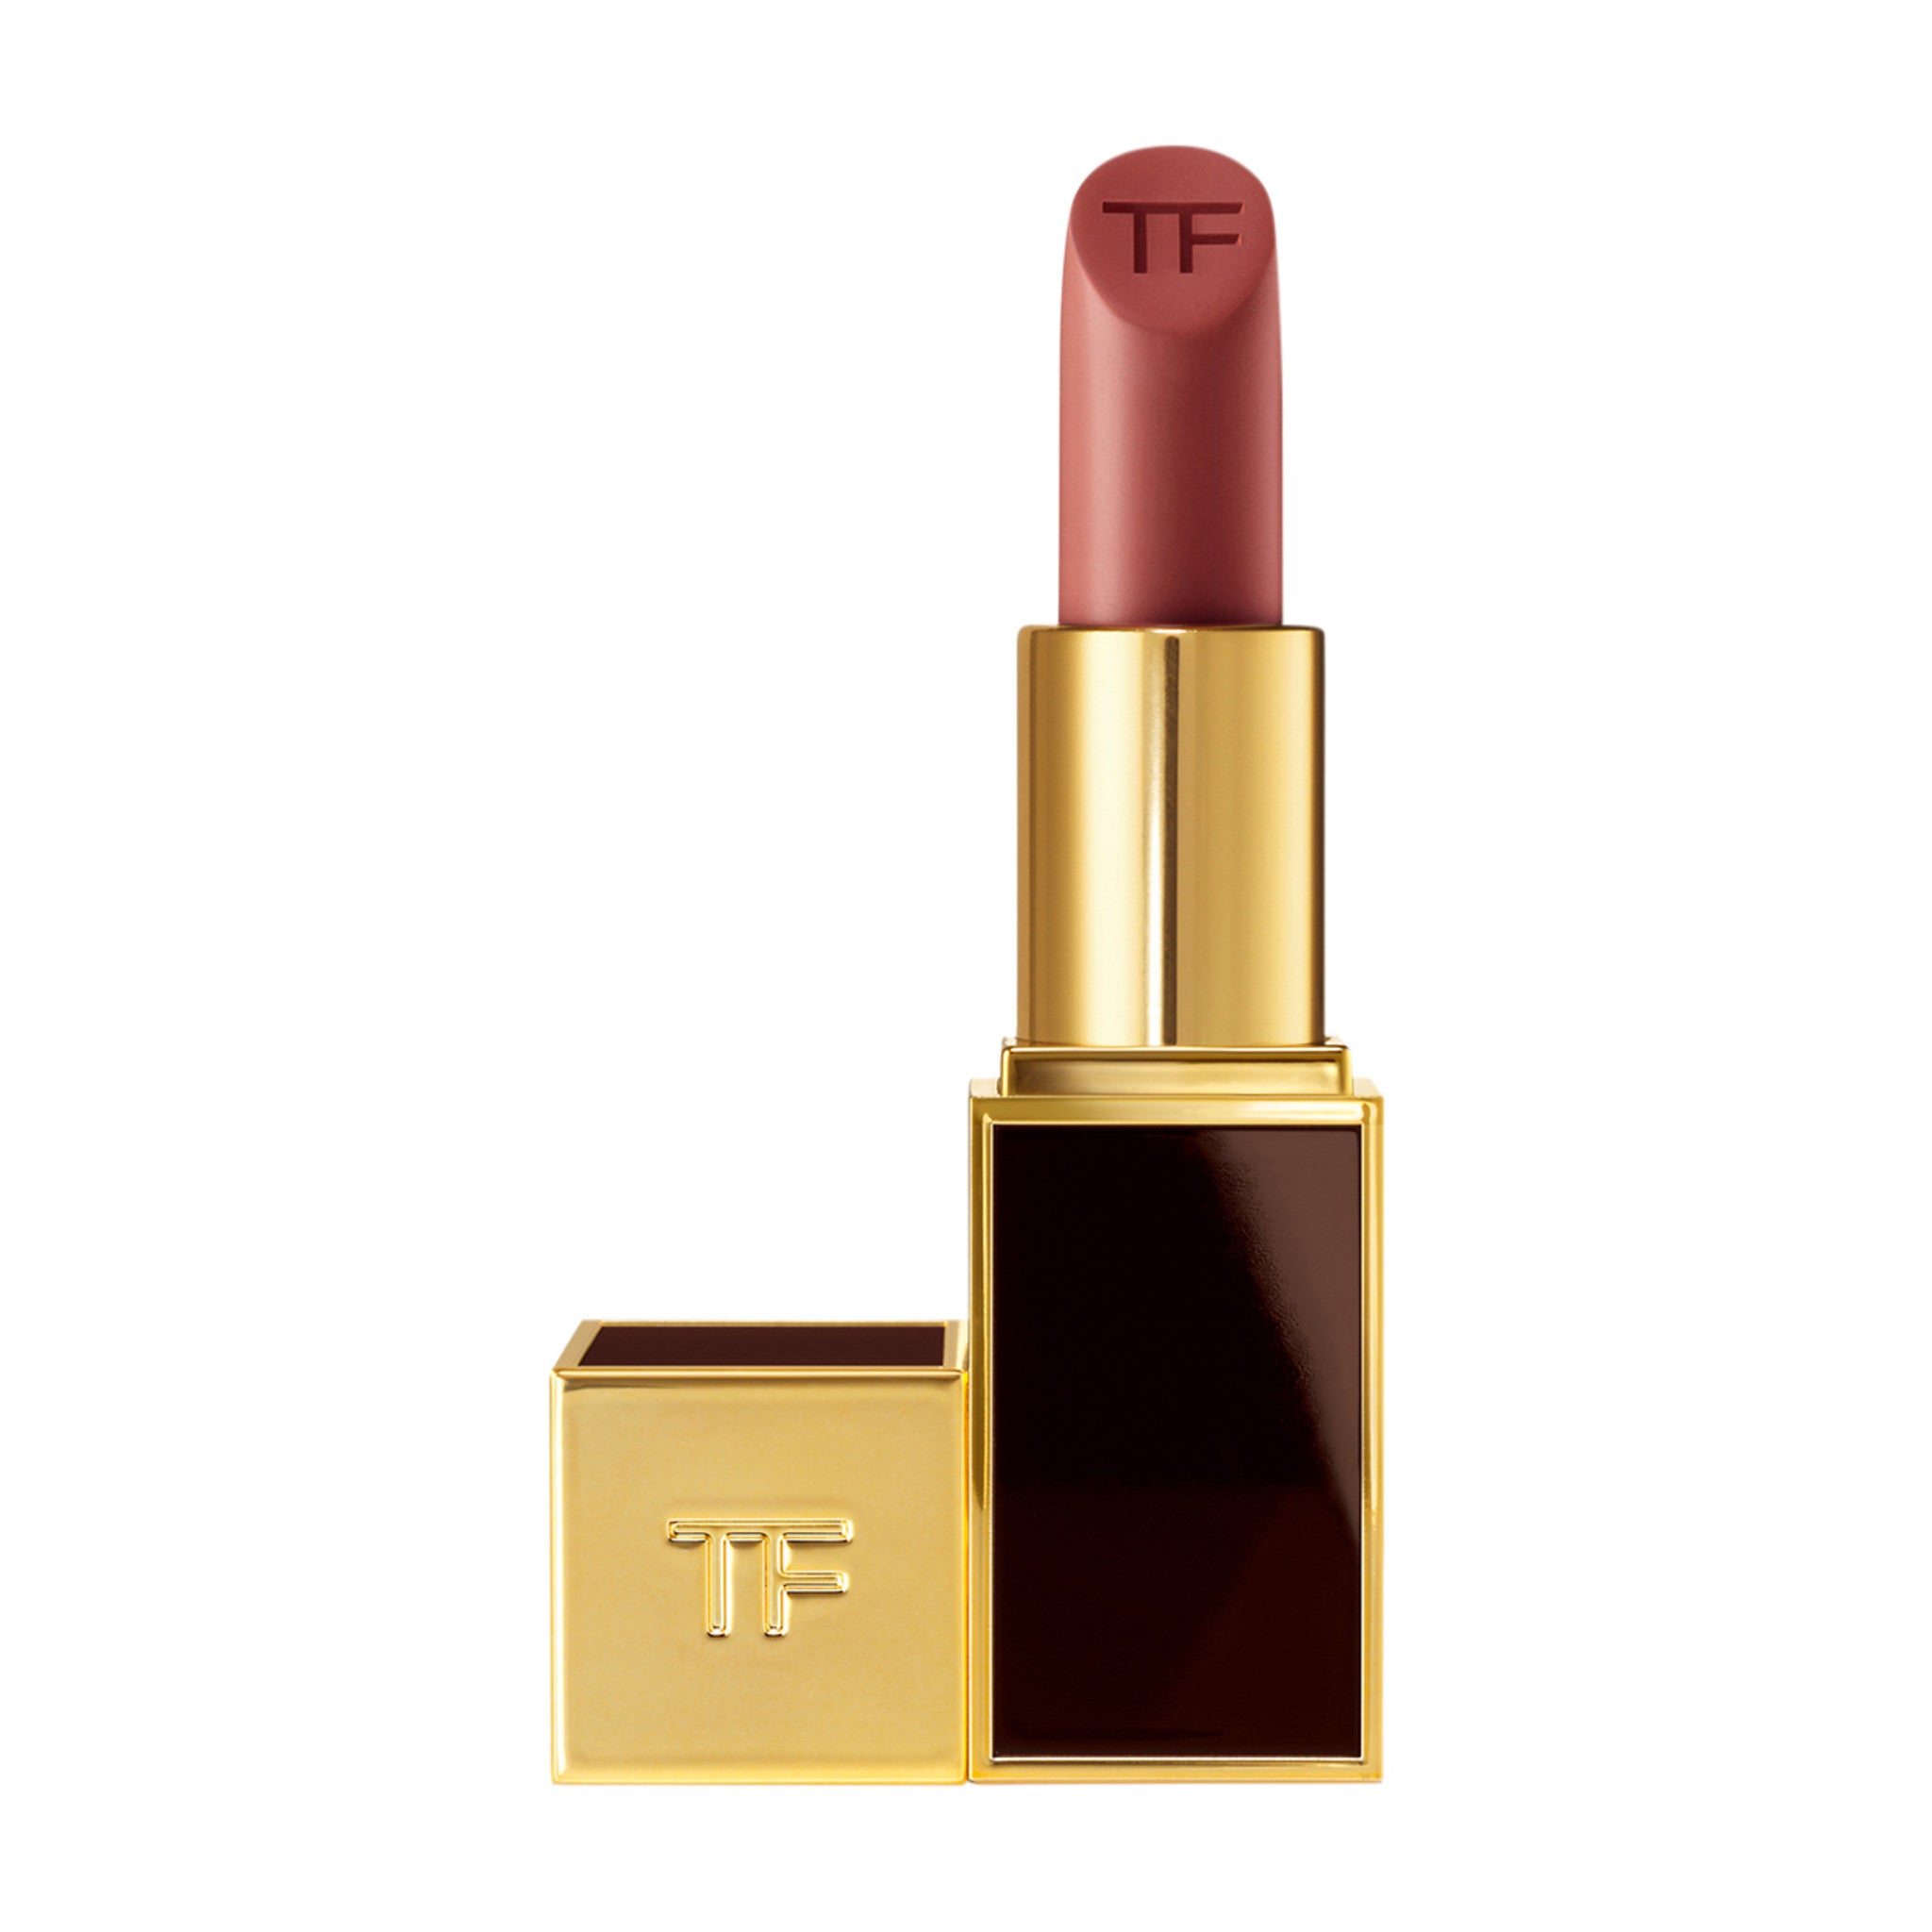 Tom Ford Lip Color Lipstick Color/Shade variant: 01 INSATIABLE main image. This product is in the color brown